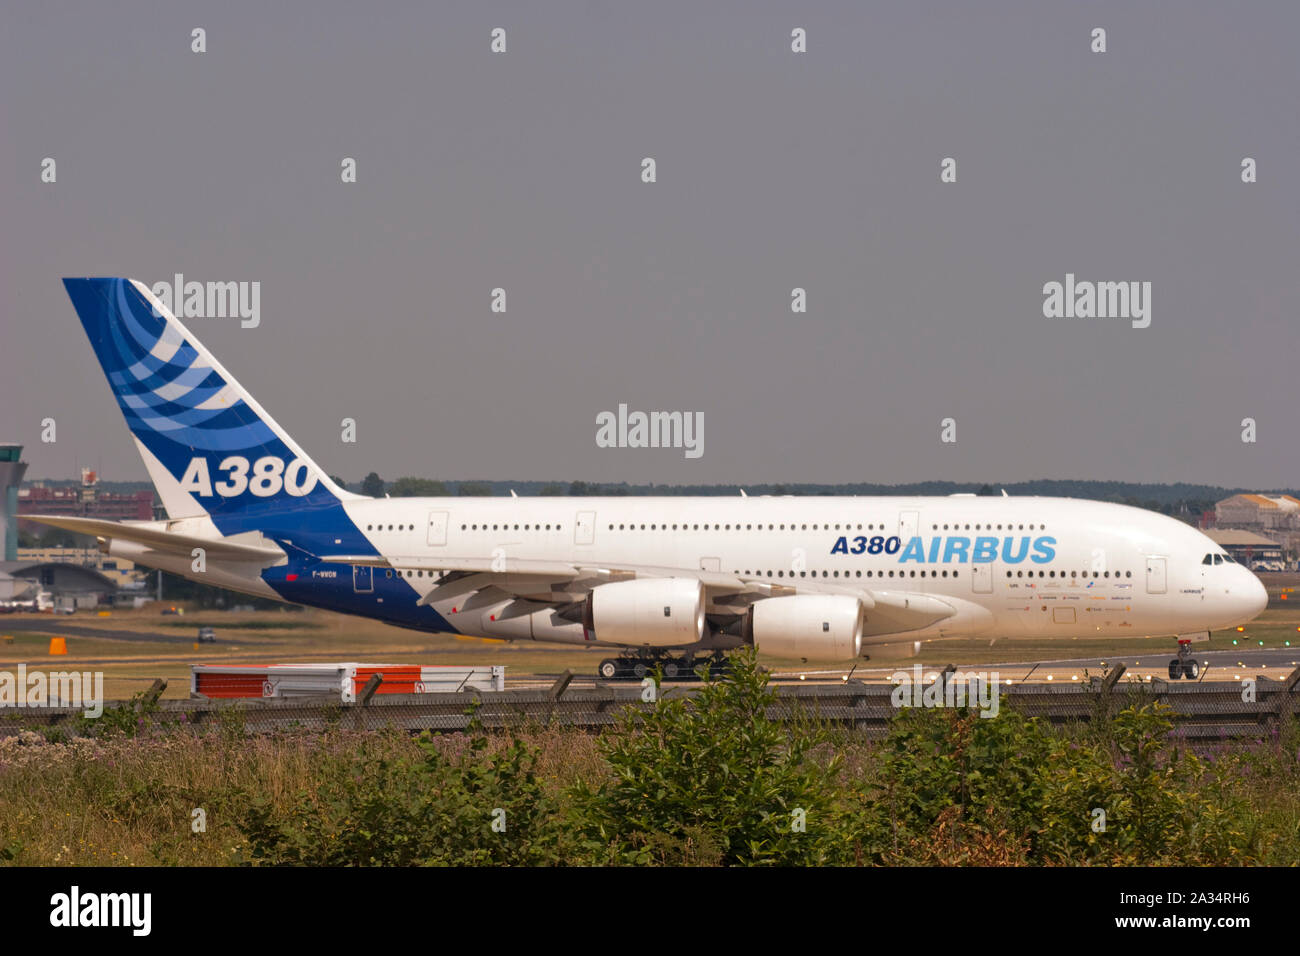 An Airbus Industrie Airbus A380-841 aircraft taxing at the Farnborough International Airshow. Stock Photo